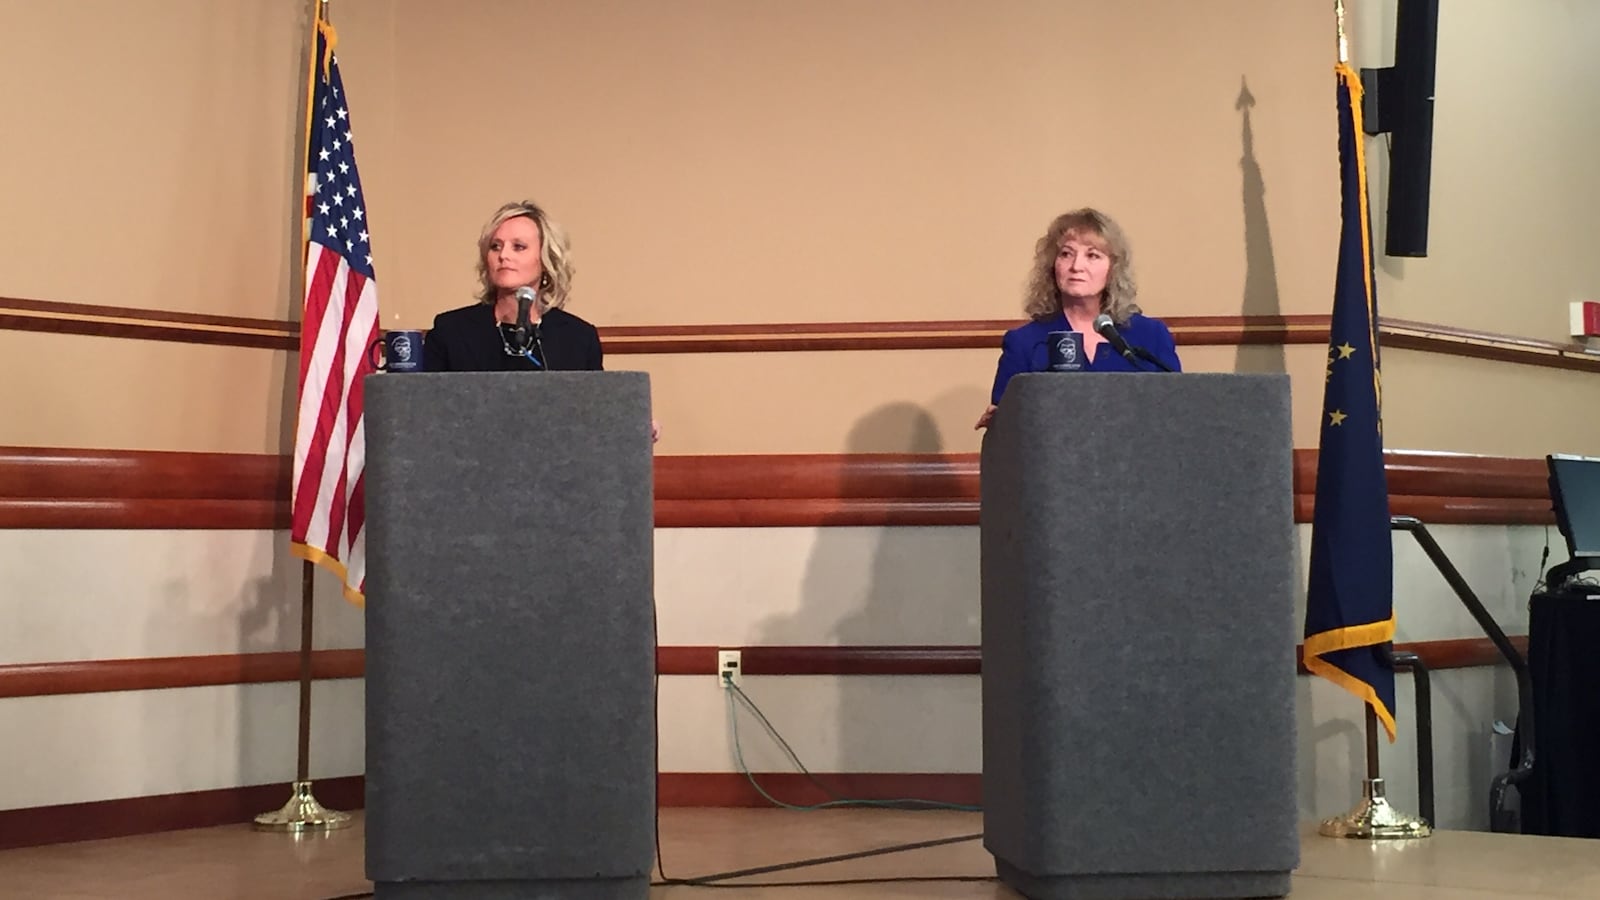 Glenda Ritz and Jennifer McCormick debated in Fort Wayne during the 2016 campaign this past fall.